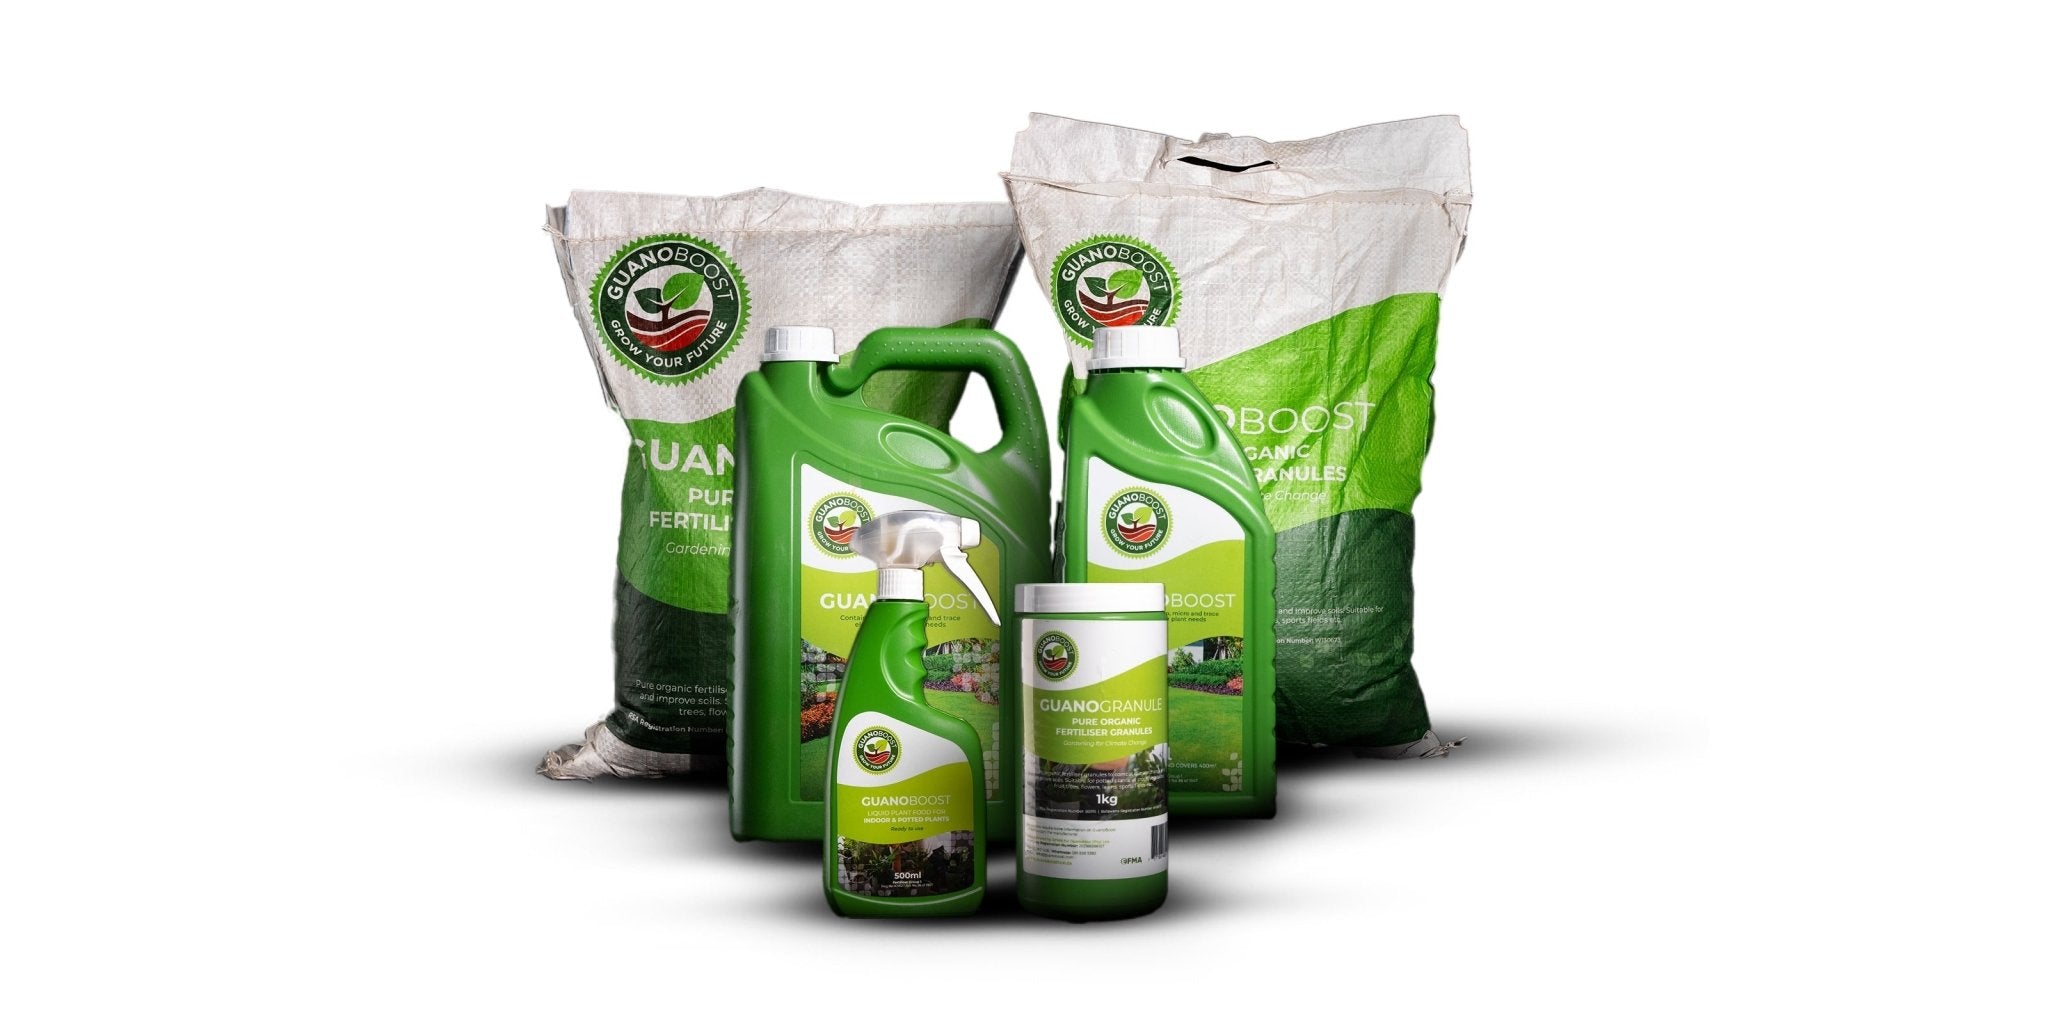 The key to a thriving garden using our top grass fertilizer - GuanoBoost